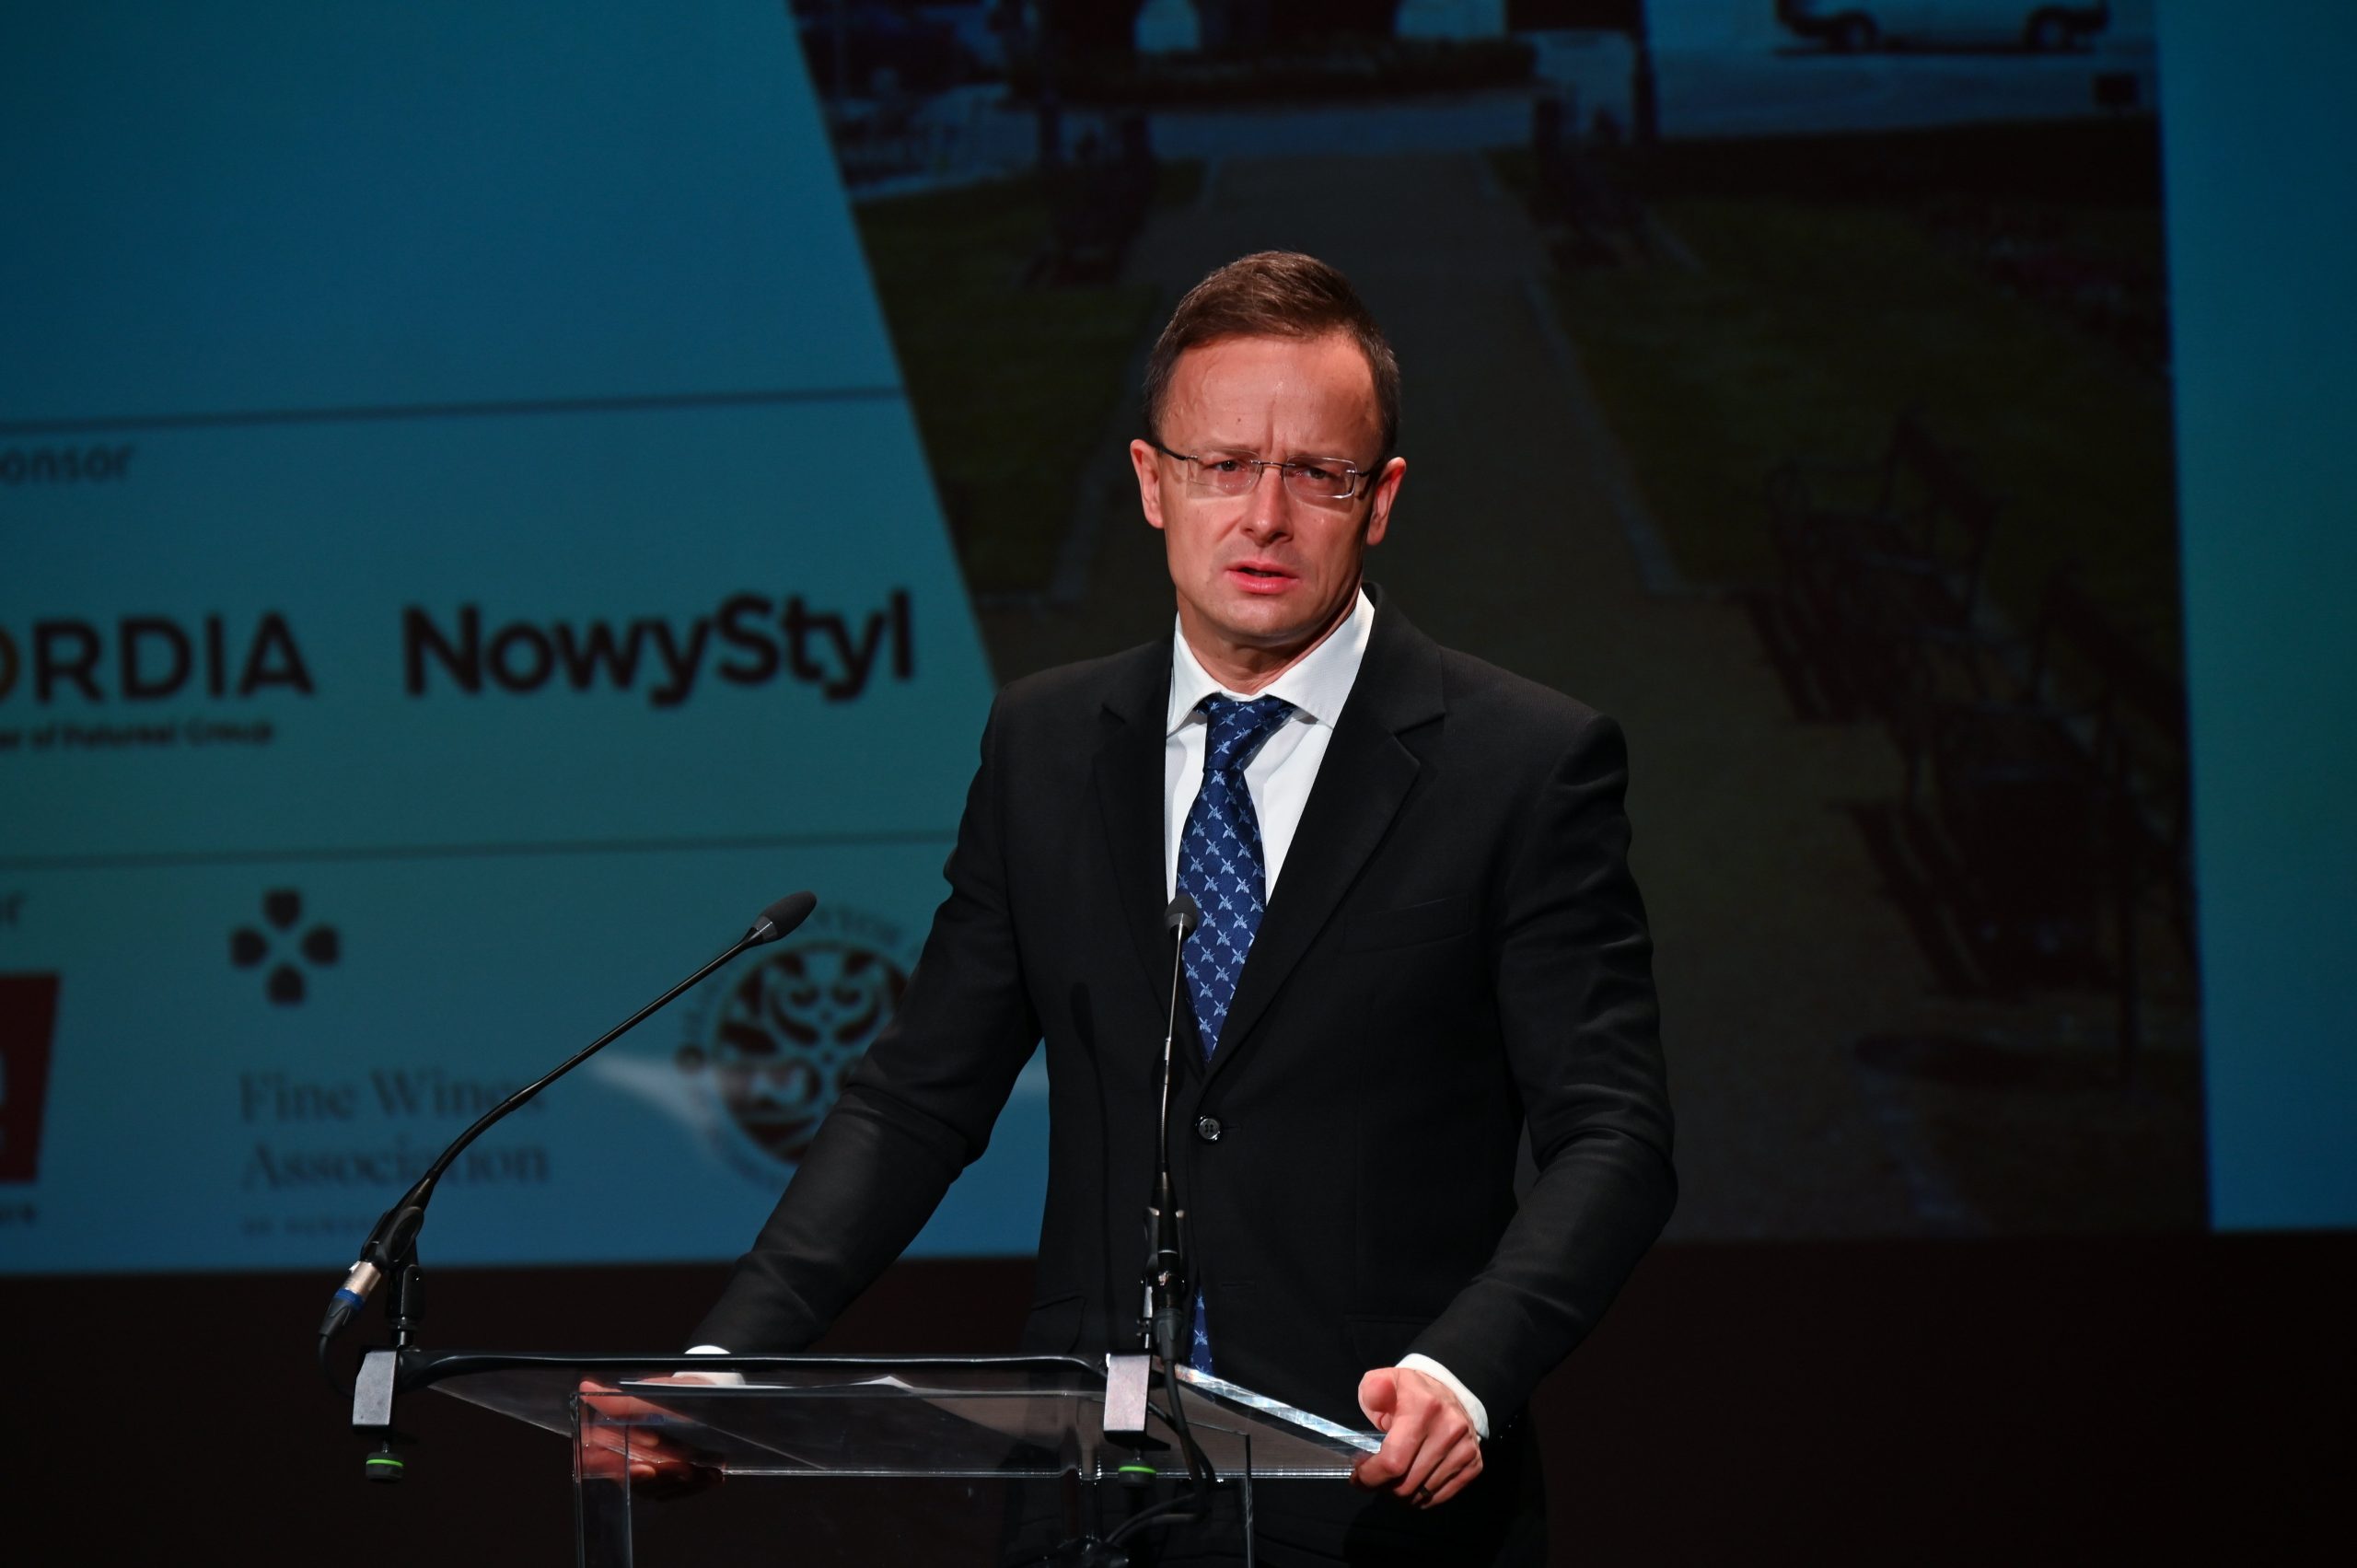 FM Szijjártó to Russia Today: West “Hypocritical” Regarding Russia and China